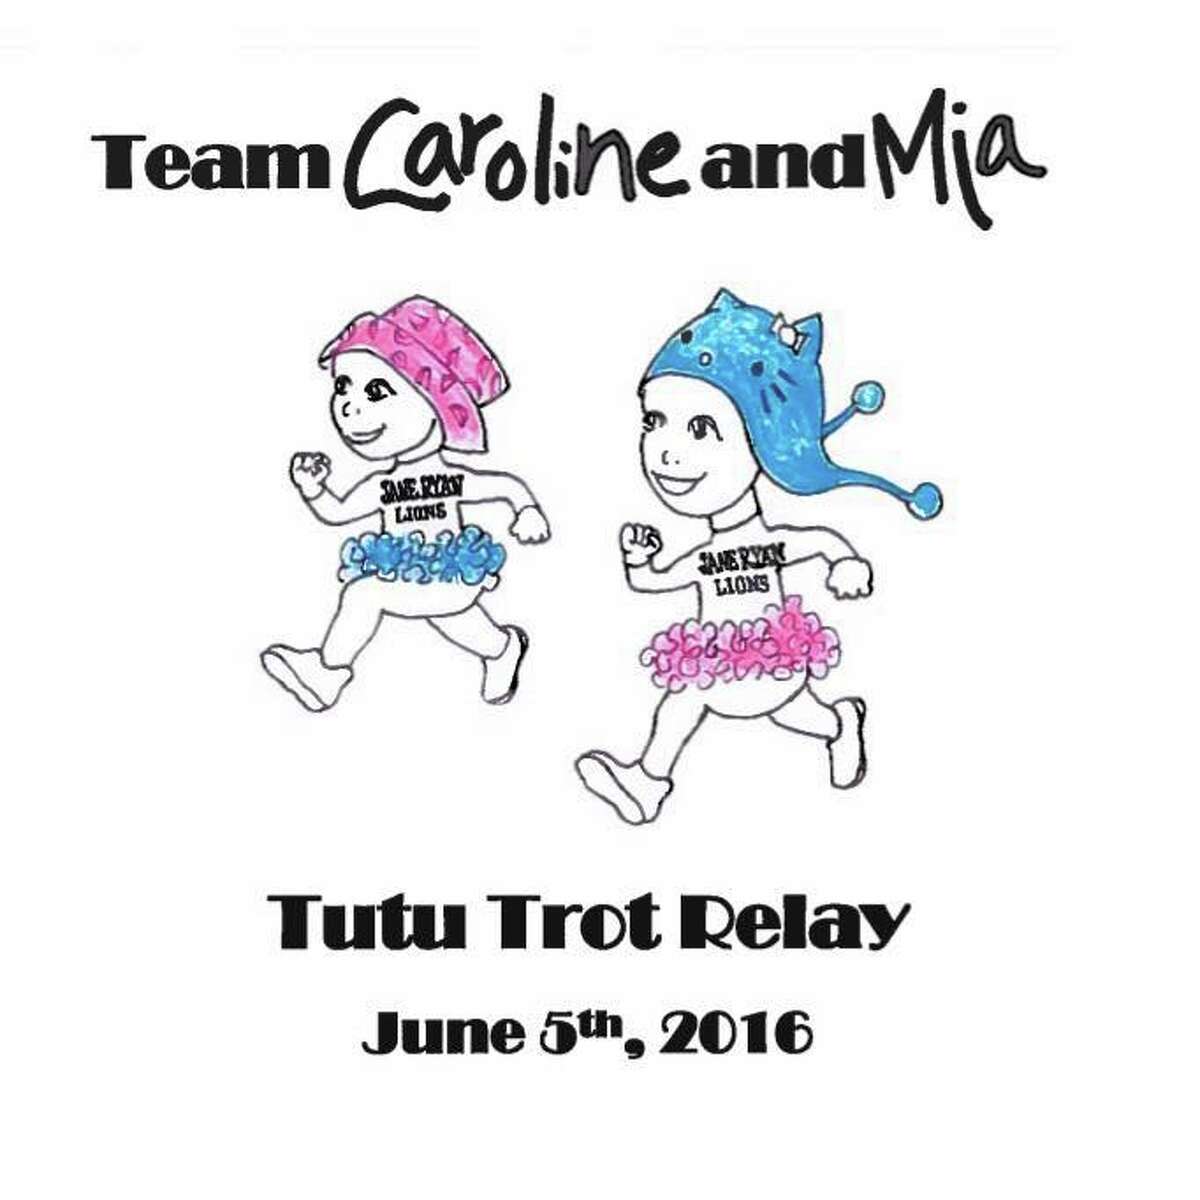 The Tutu Trot Relay is a special event being held at Trumbull High School at 4:30 p.m. Sunday, June 5, to benefit and support Mia and Caroline, a pair of Jane Ryan Elementary School classmates who have both been battling pediatric cancer together this year.